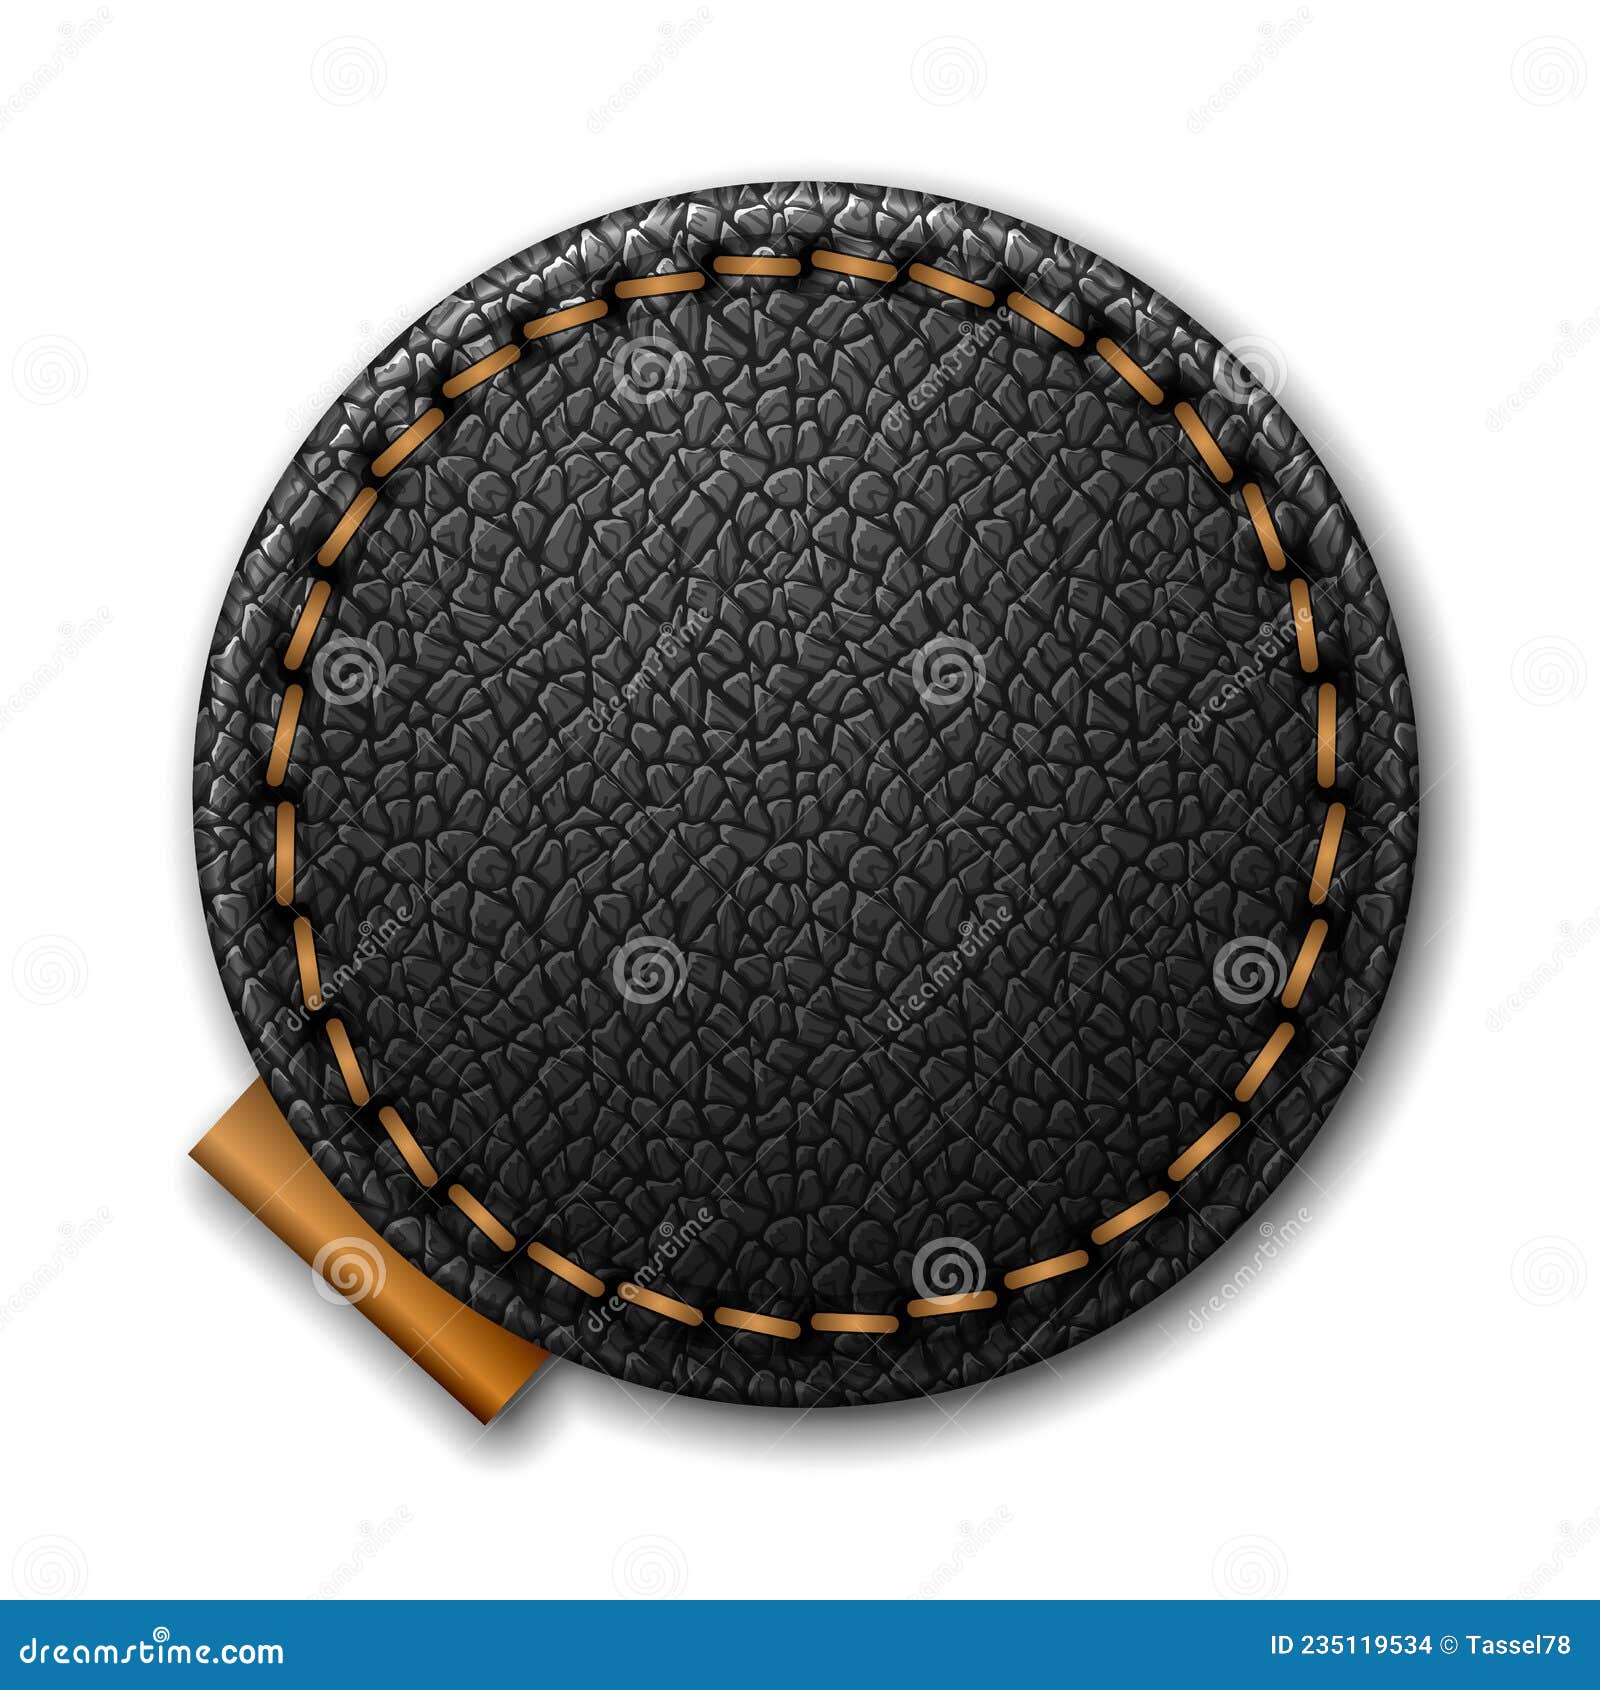 Blank Round Stitched Black Leather Label Isolated on White Background ...